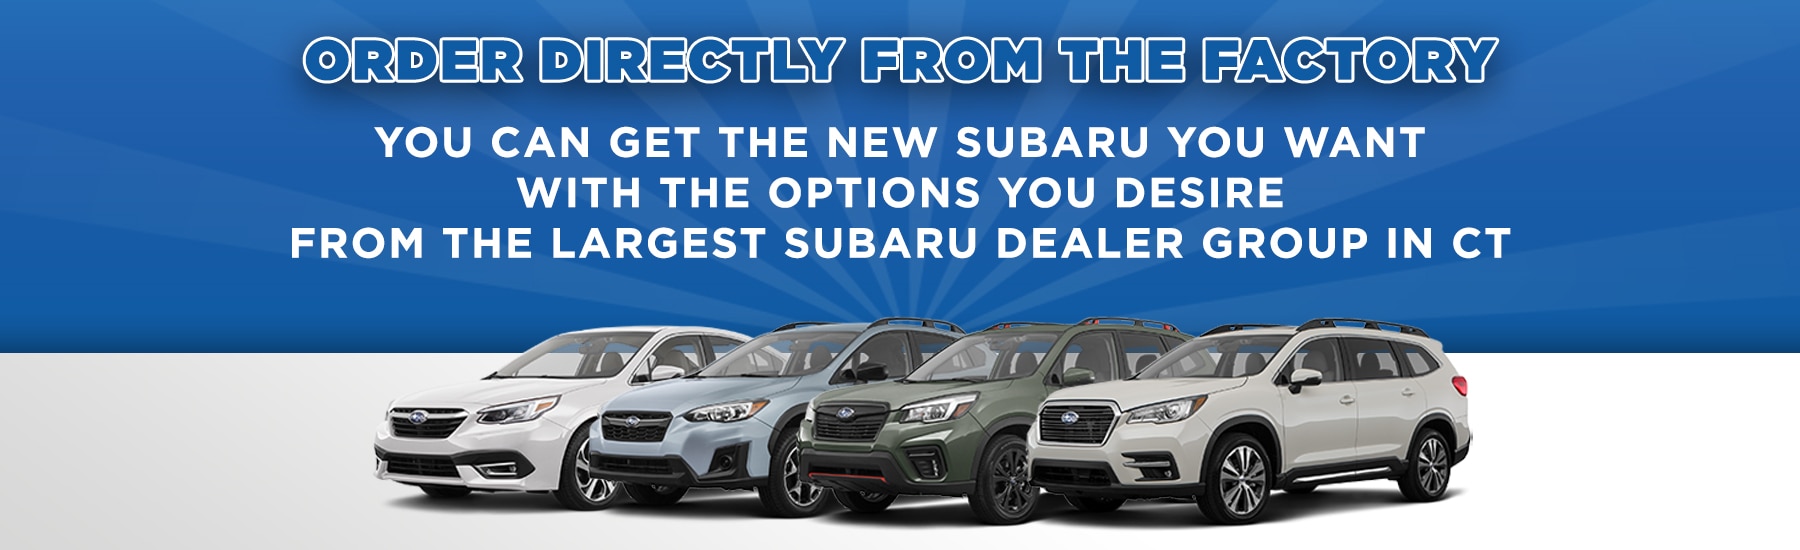 Premier Subaru can help you Order a Subaru Direct from the Factory, don't settle for the inventory that's left